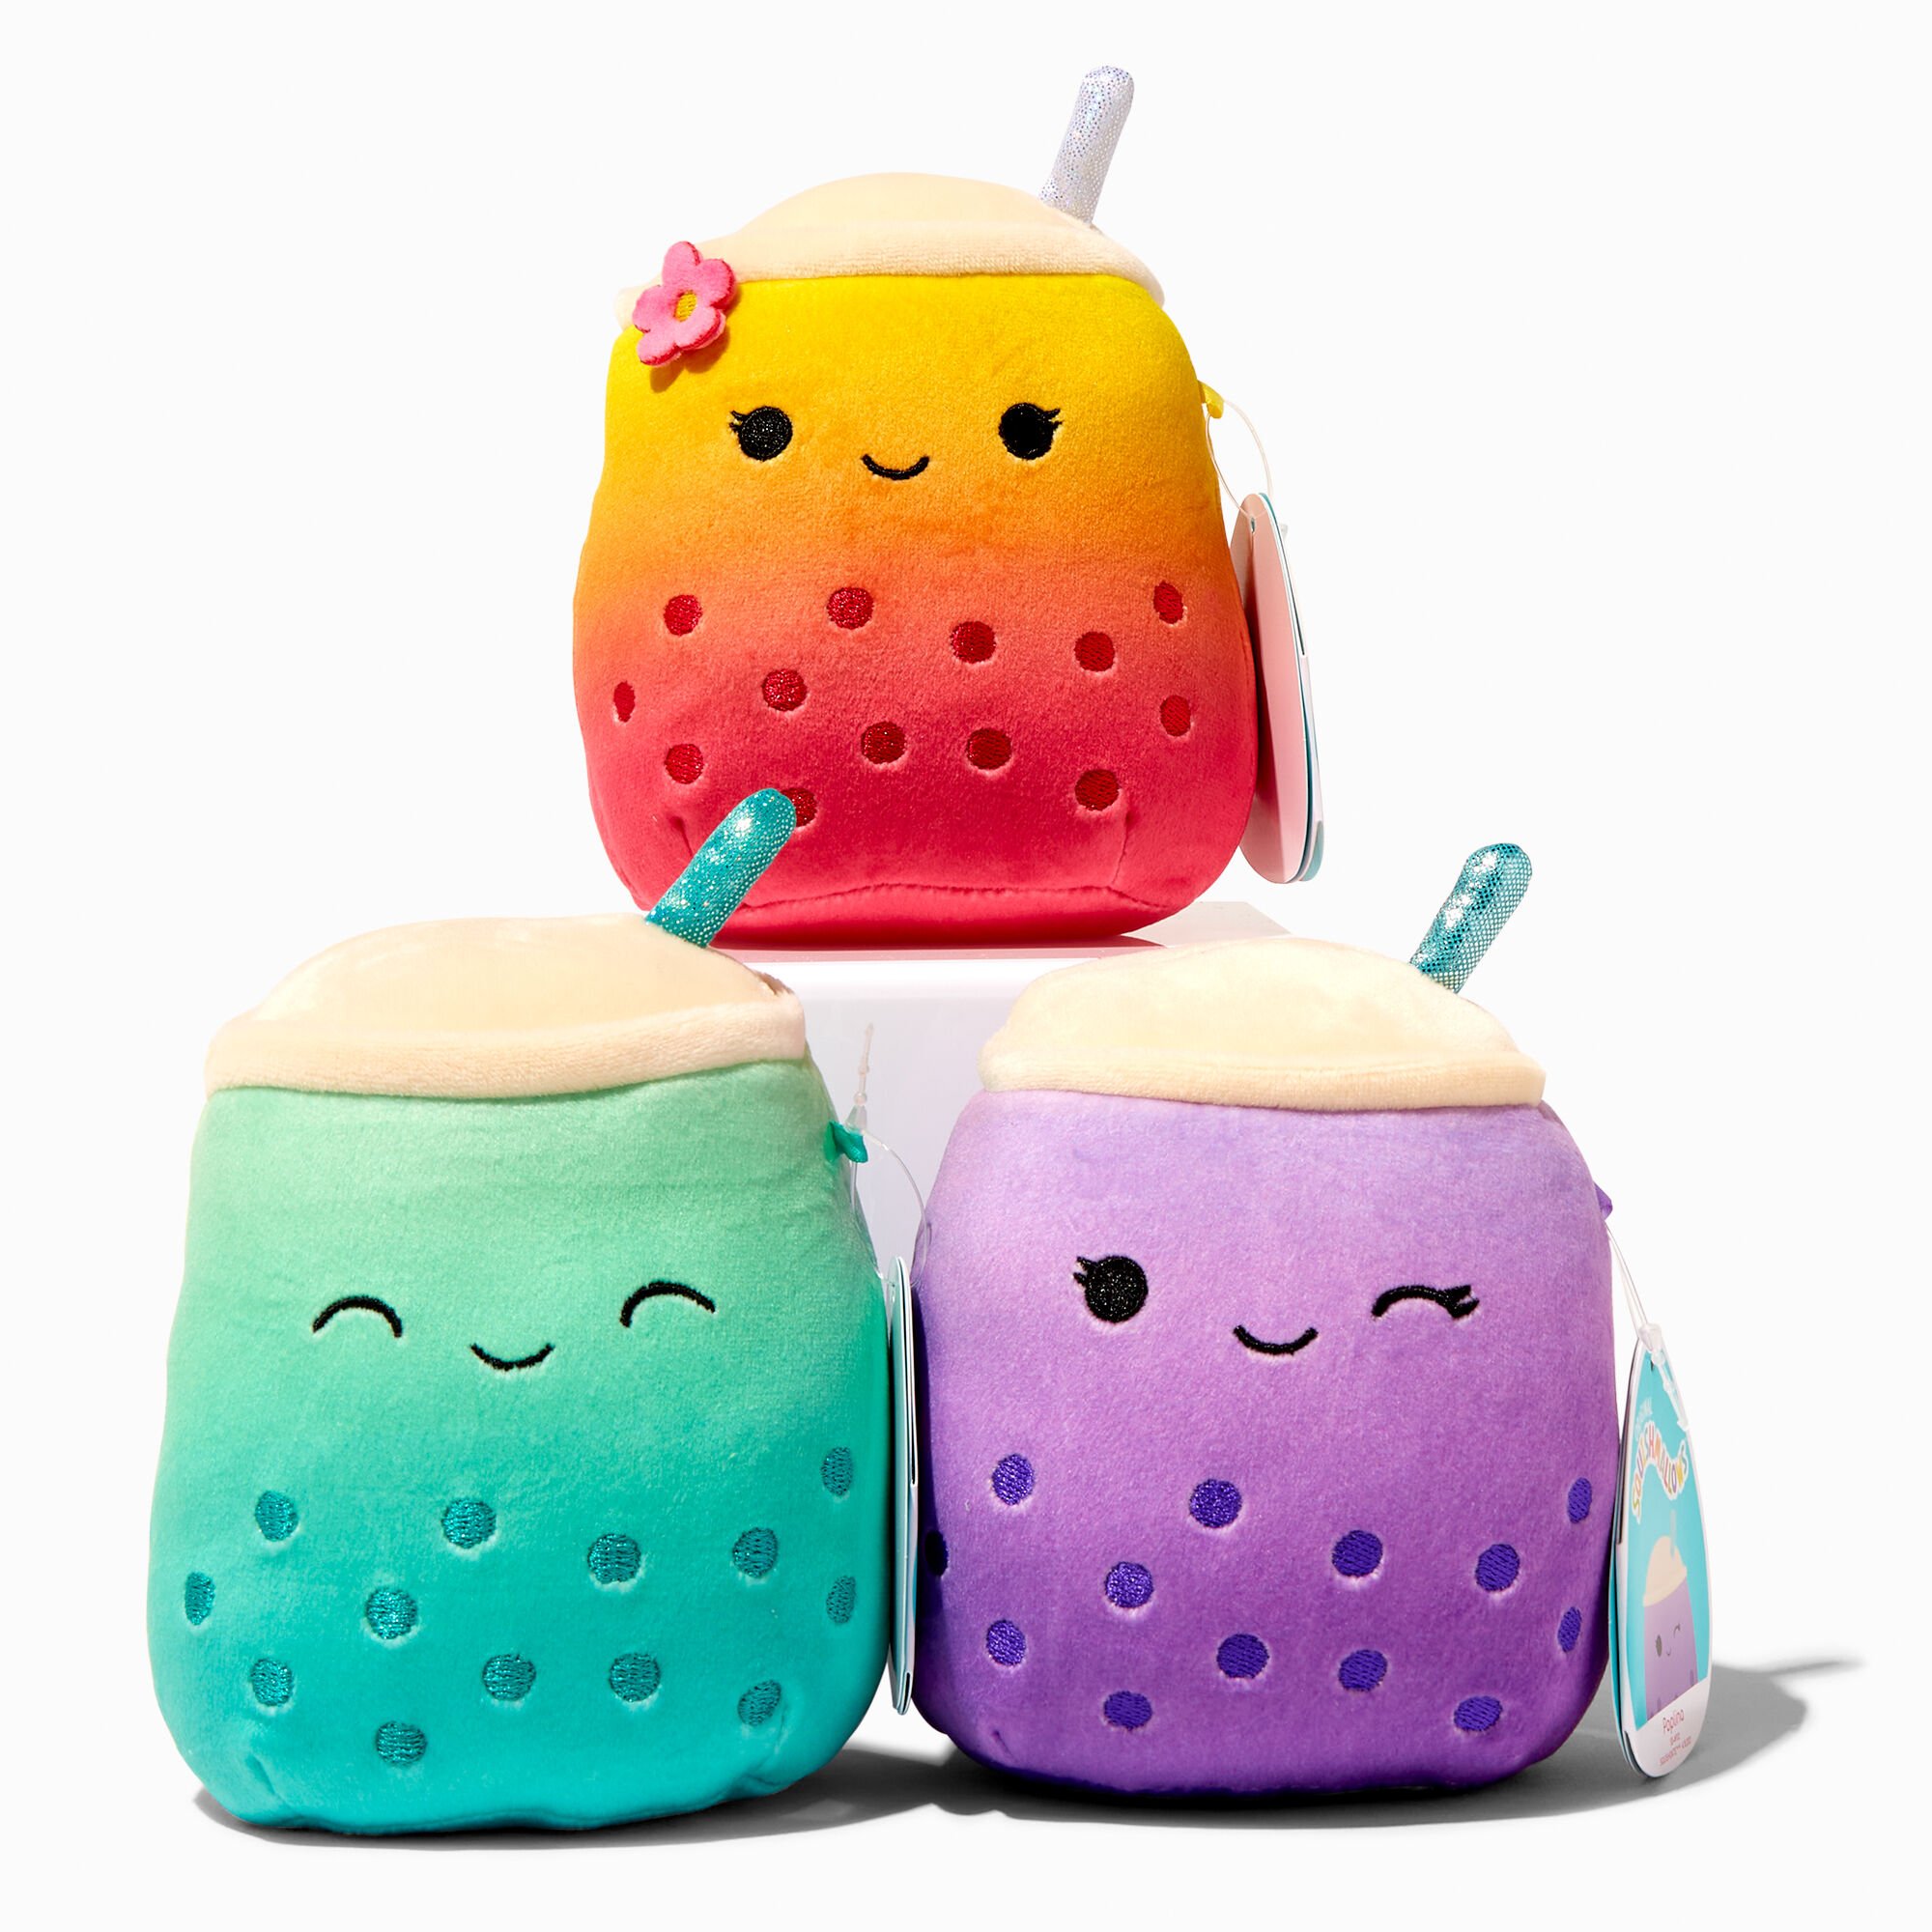 View Claires Squishmallows 5 Boba Tea Soft Toy Styles Vary information